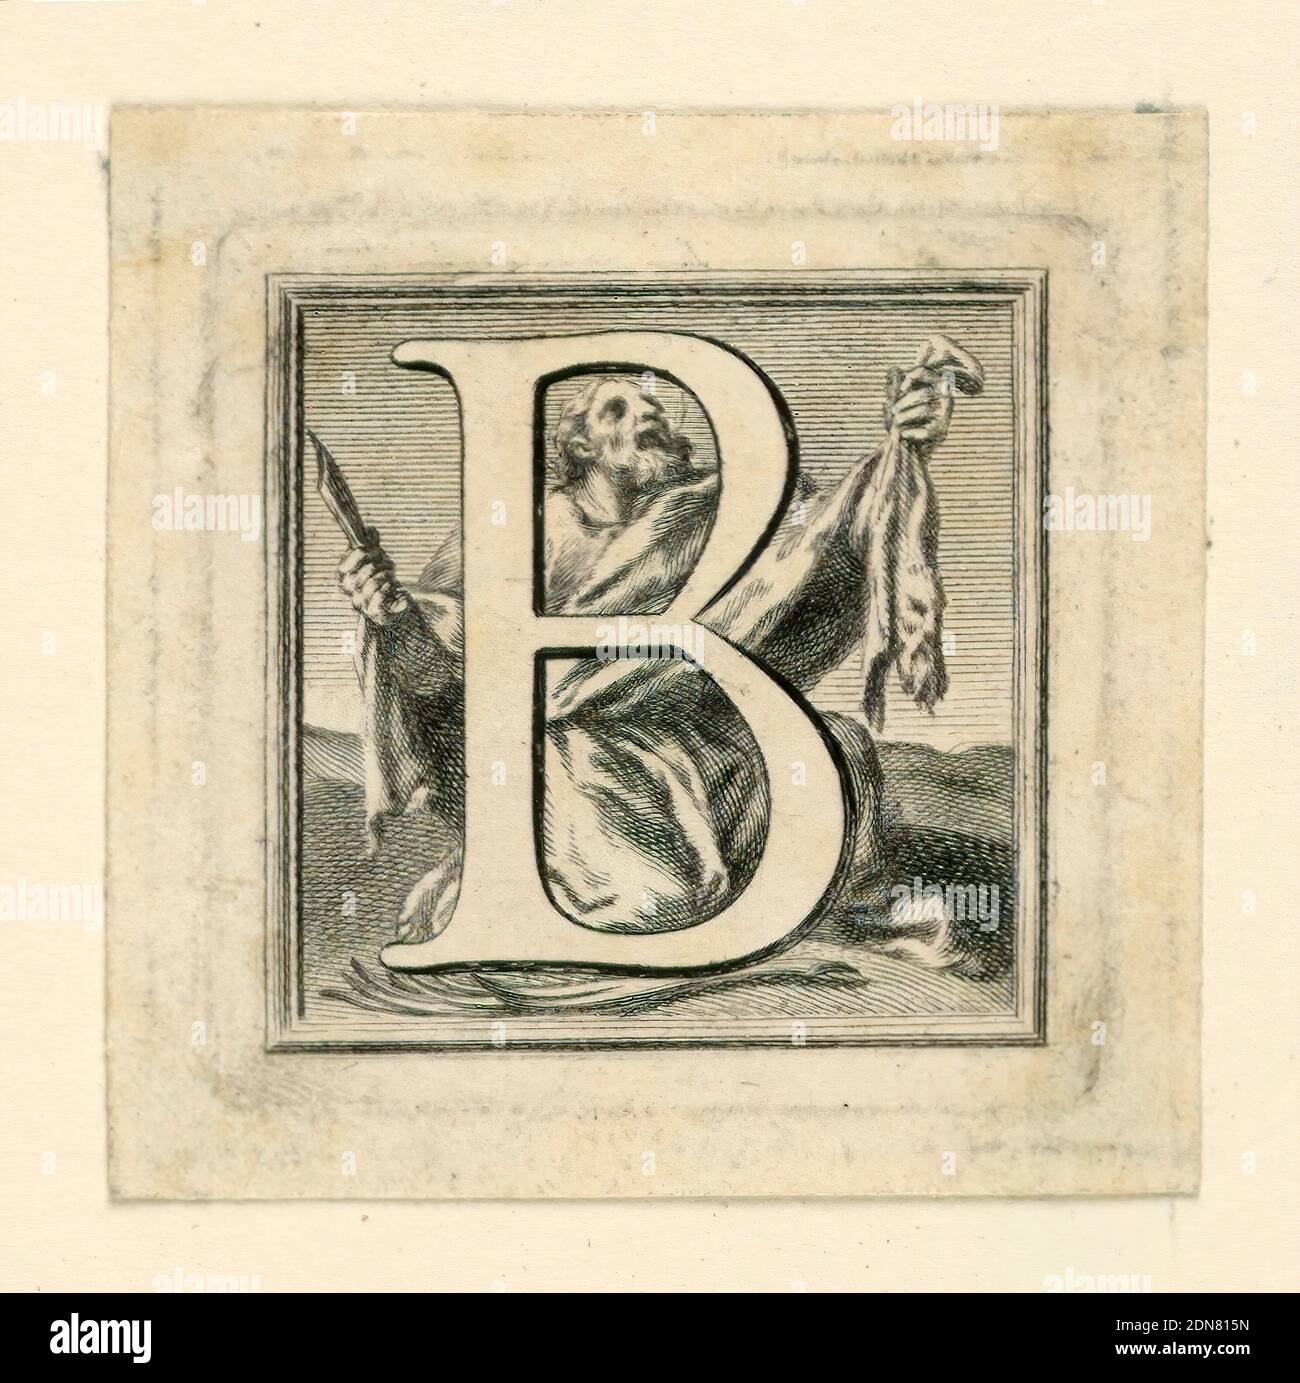 Decorated Capital Letter B, Jakob Frey, Swiss, active Italy, 1681 - 1752, Giovanni Passari, Italian, Engraving on paper, Letter 'B' standing before St. Bartholomew, who kneels, carrying knife and skin., Rome, Italy, 1715, ephemera, Engraving, Engraving Stock Photo